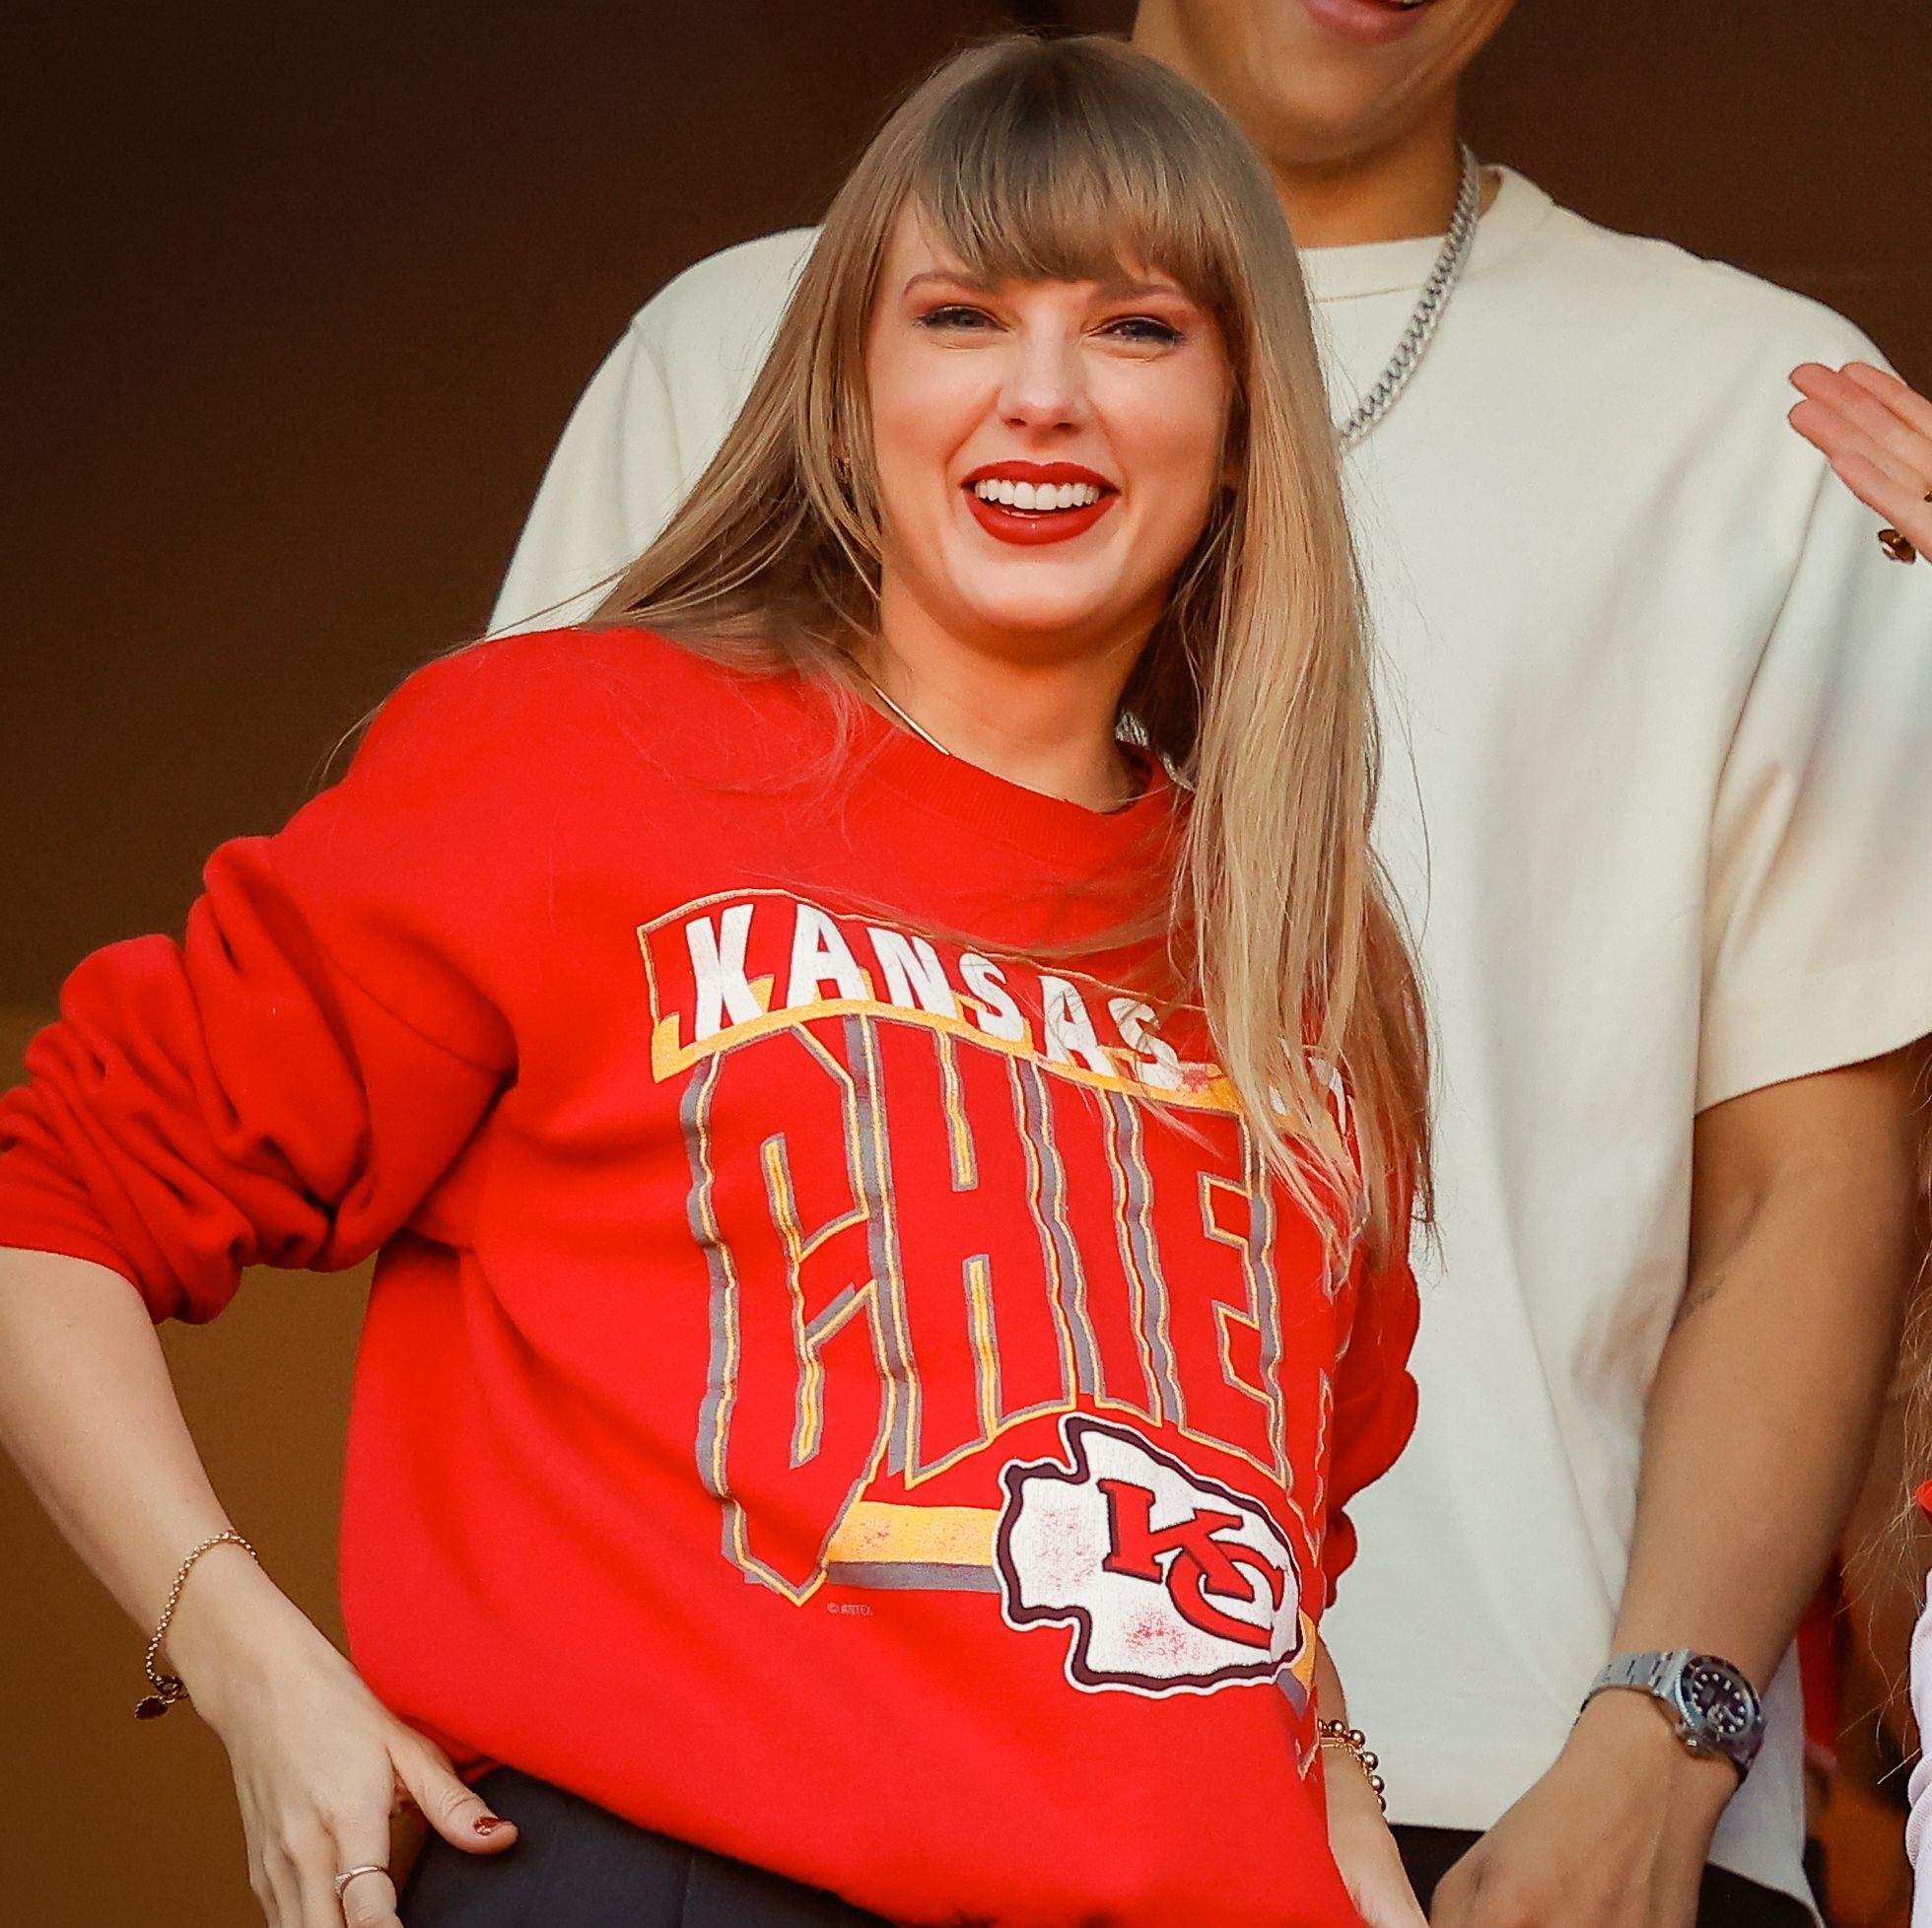 Taylor Swift Isn't at the Chiefs vs. Eagles Game Tonight Due to a Last Minute Change of Plans